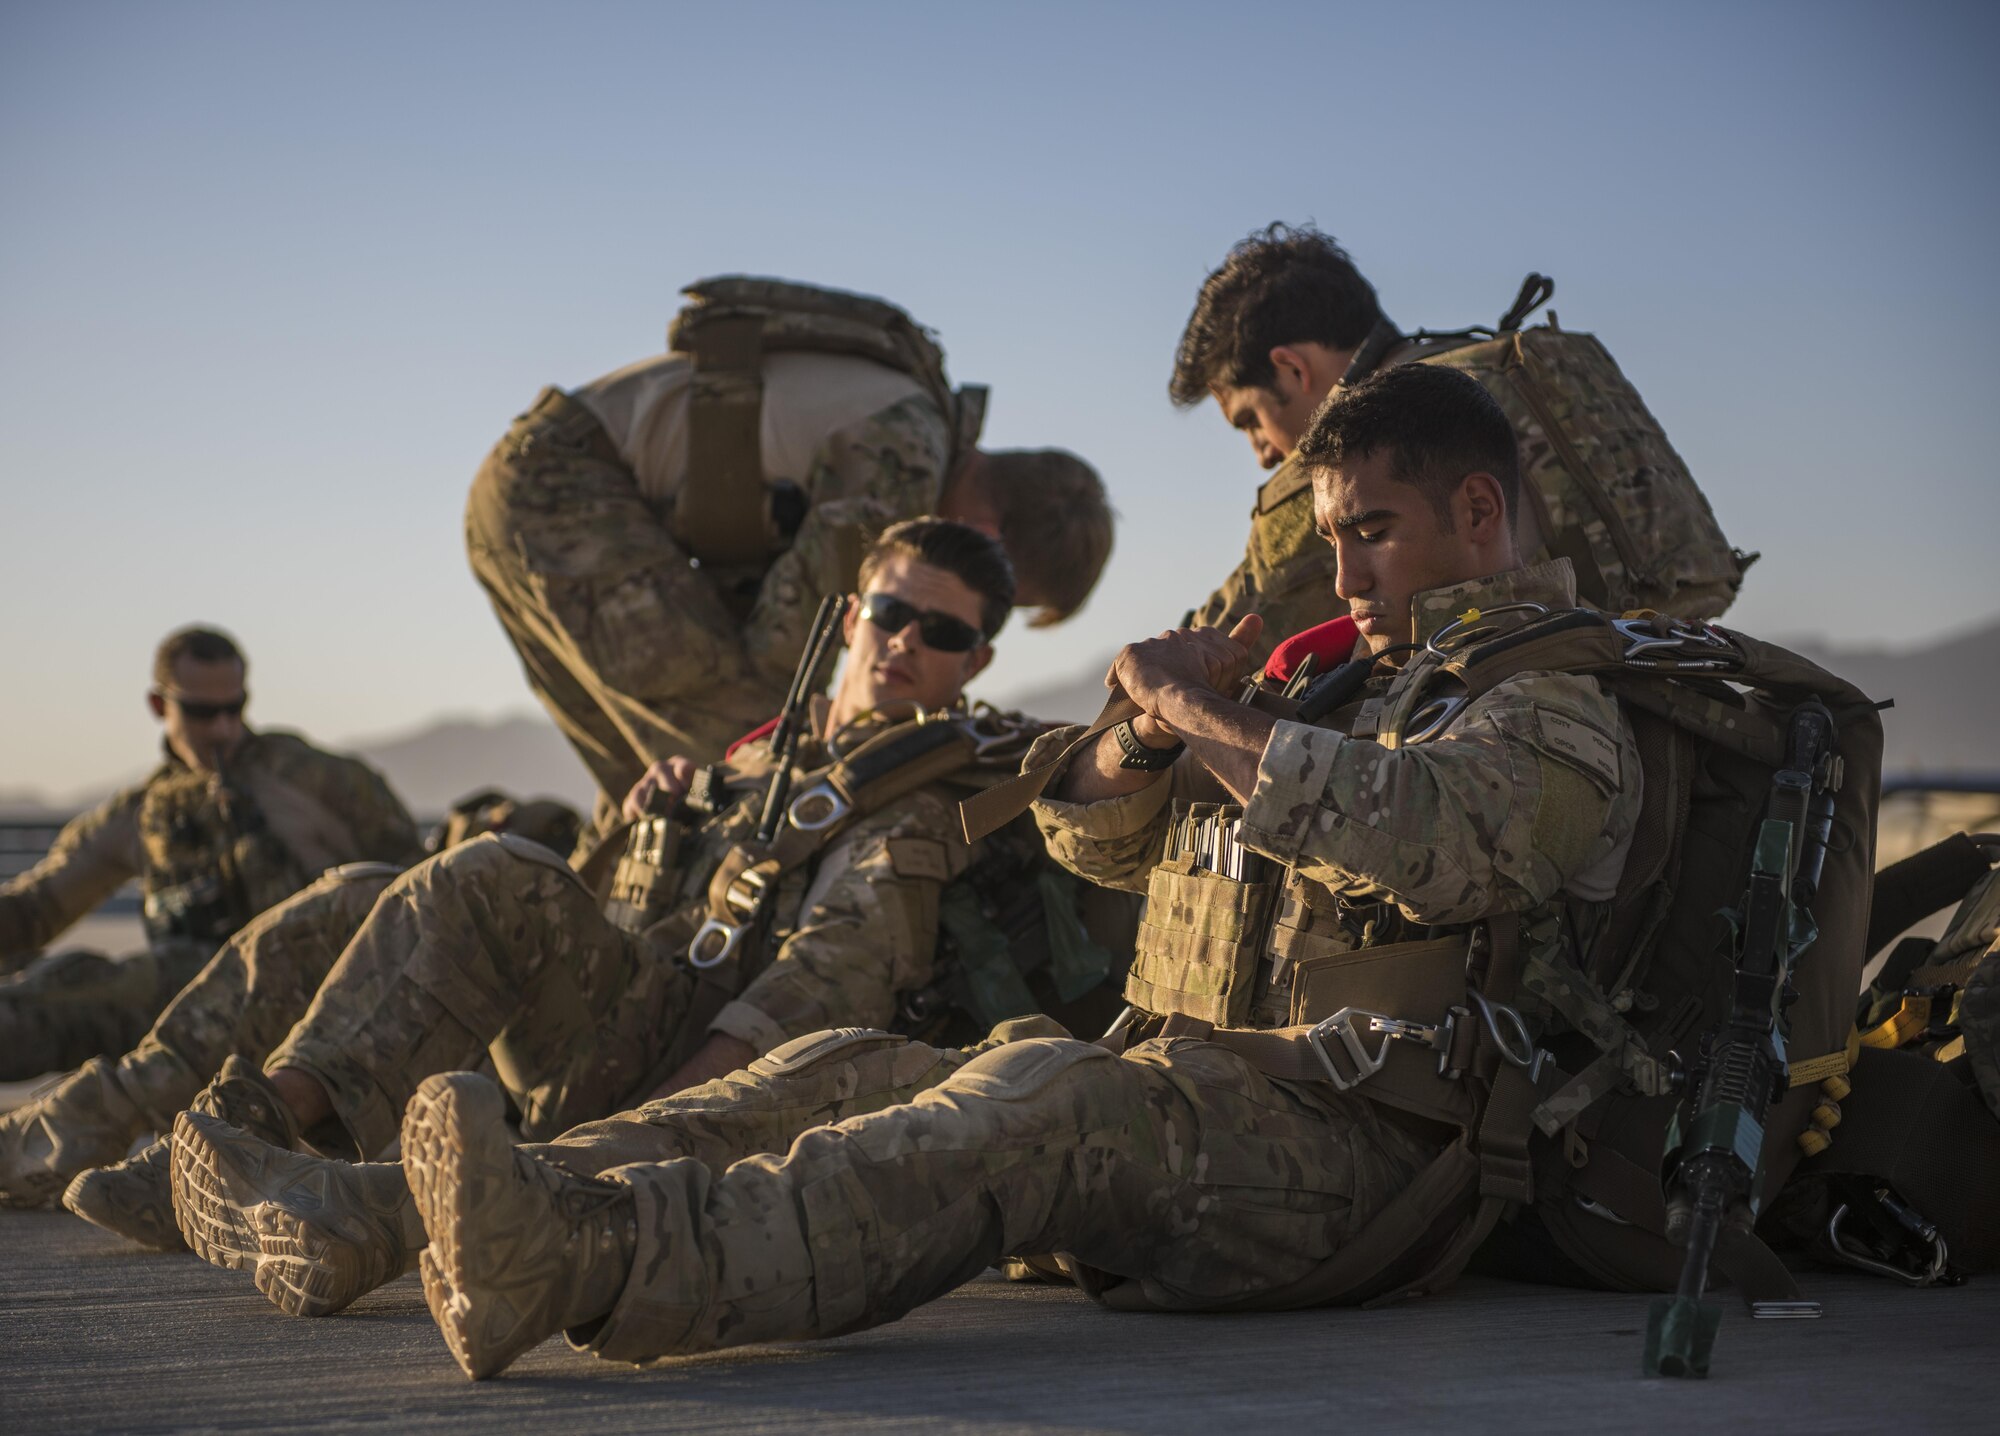 Pararescuemen from the 83rd Expeditionary Rescue Squadron conduct checks before a jump, Bagram Airfield, Afghanistan, Sept. 03, 2016. Airmen from the 83rd ERQS, 774th Expeditionary Airlift Squadron, and 455th Expeditionary Aeromedical Evacuation Squadron, conducted a first of its kind mission rehearsal. The mission rehearsal integrated the various units to conduct an aerial insertion of an Air Force personnel recovery team. (U.S. Air Force photo by Senior Airman Justyn M. Freeman)